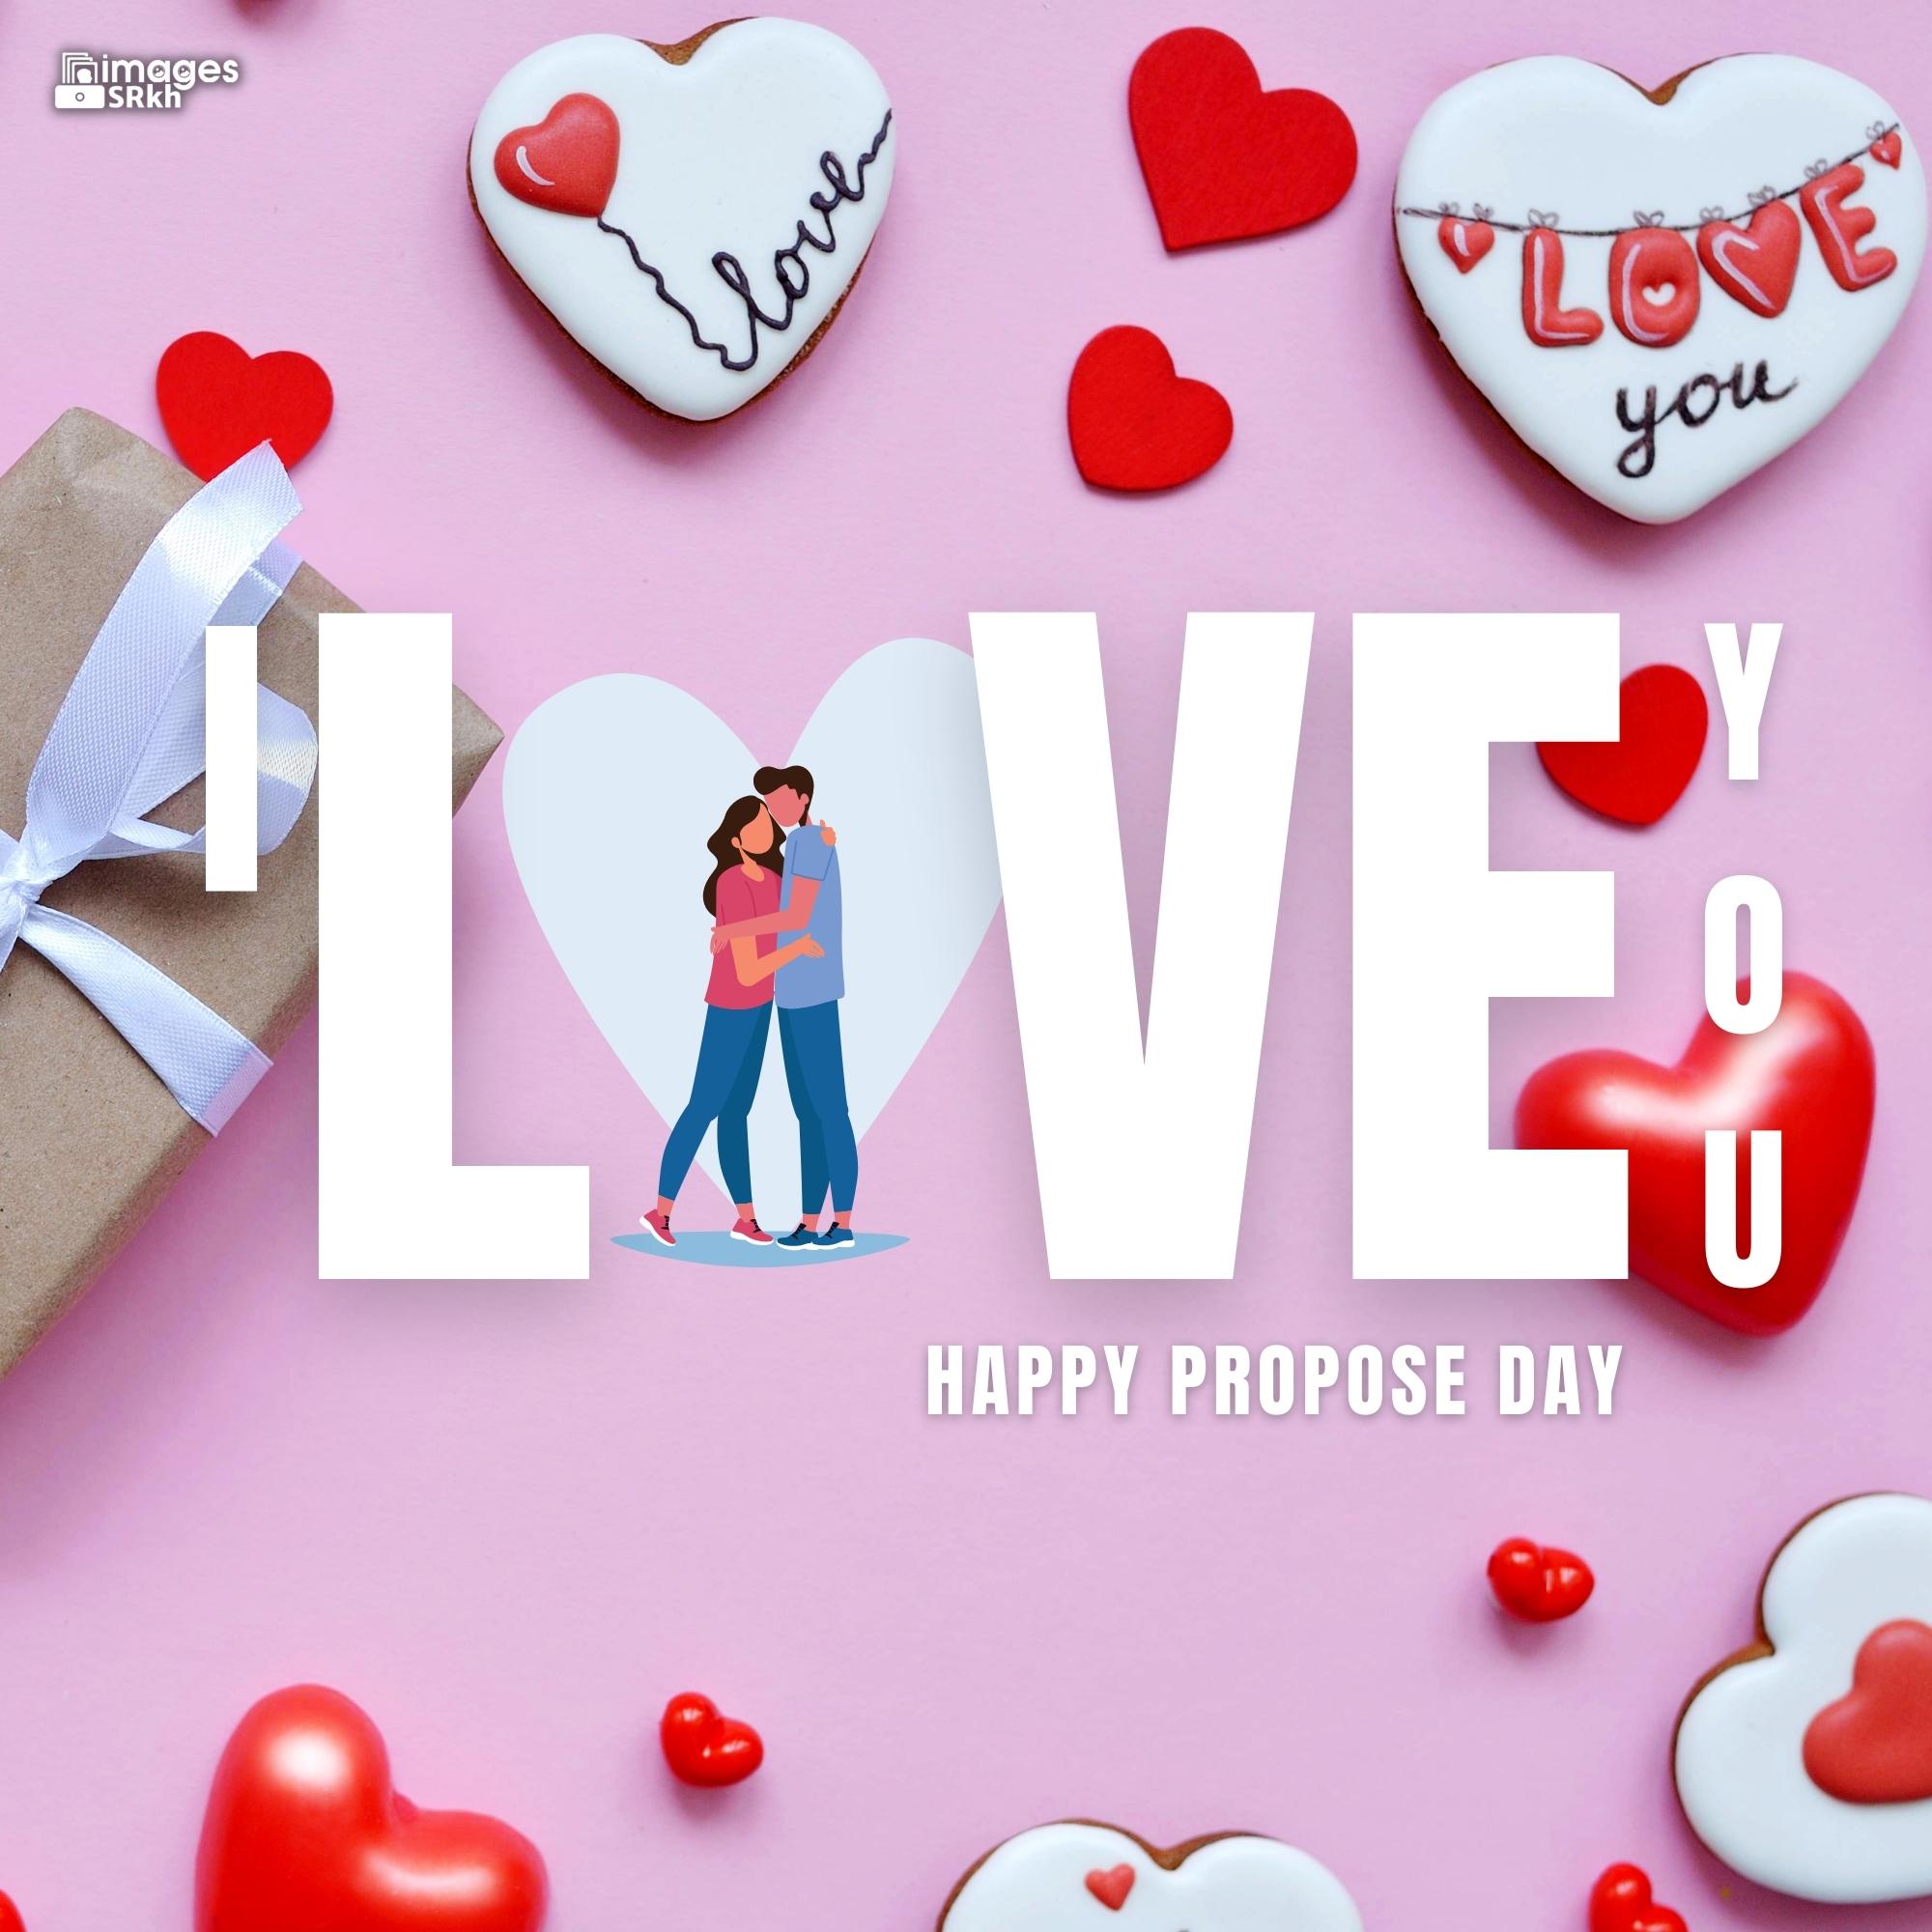 Happy Propose Day Images | 403 | I LOVE YOU